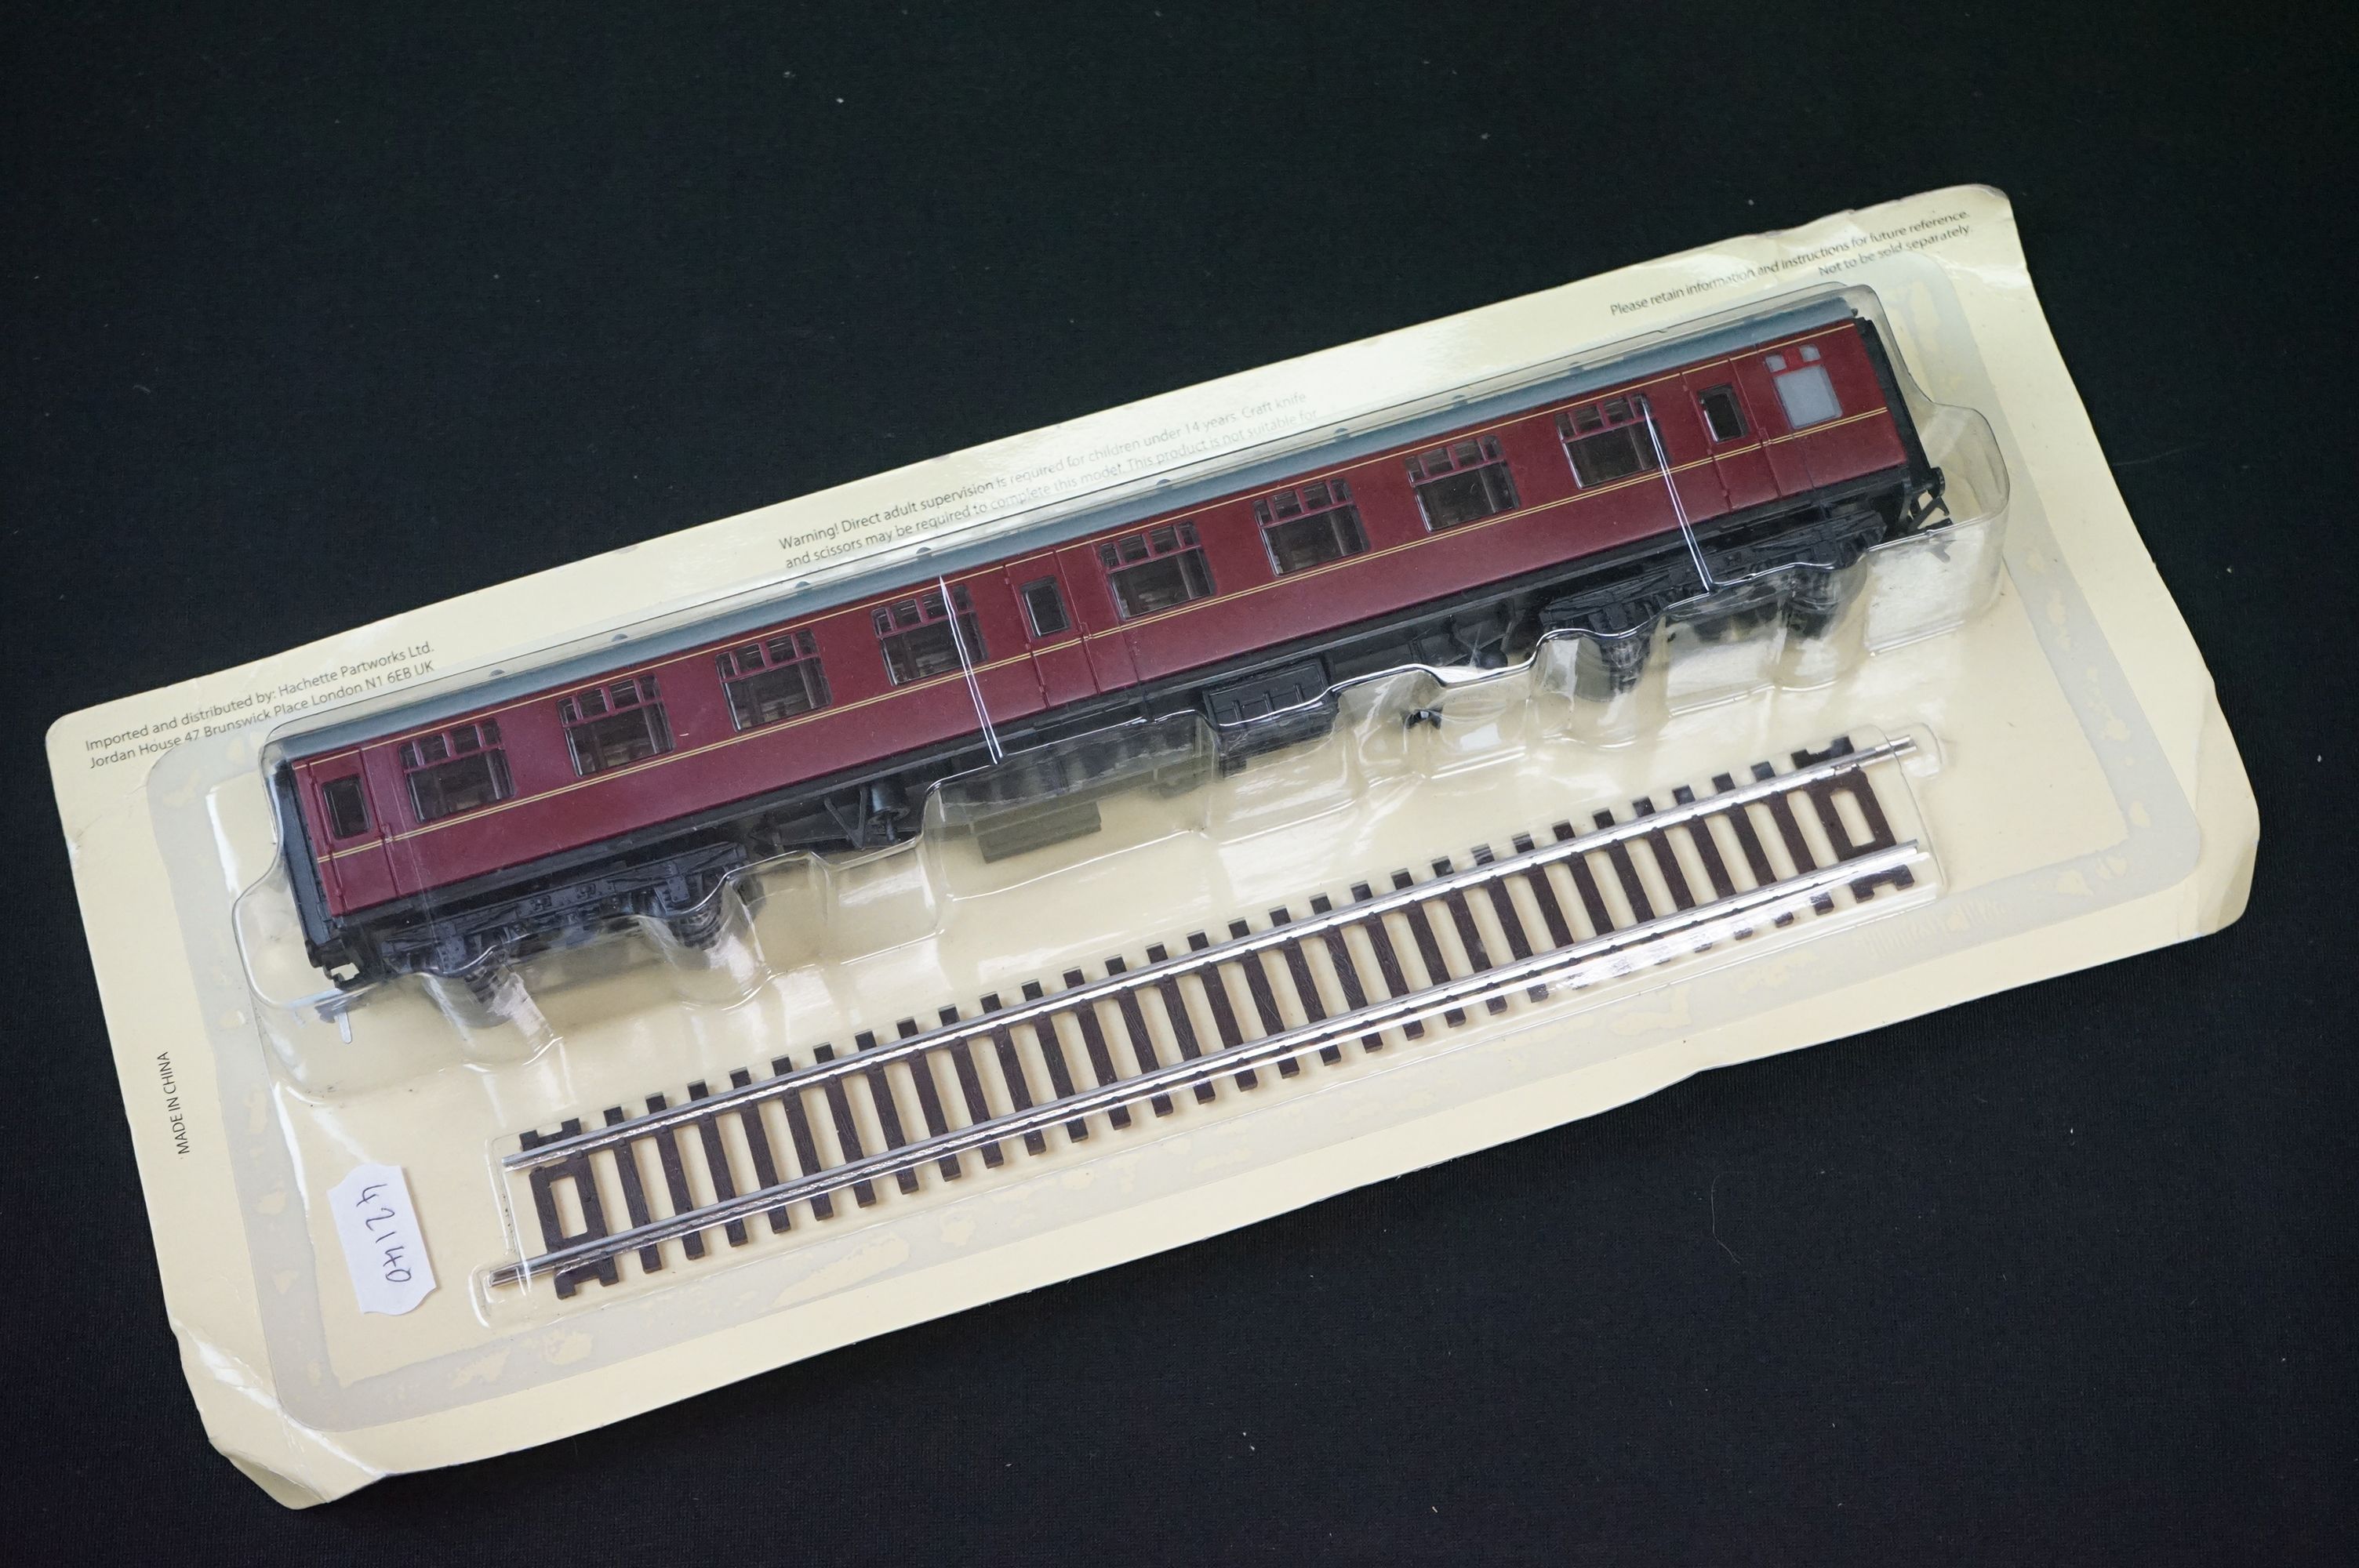 Group of N gauge model railway to include boxed Rapido 0236 locomotive, 5 x boxed Rapido items of - Image 5 of 11